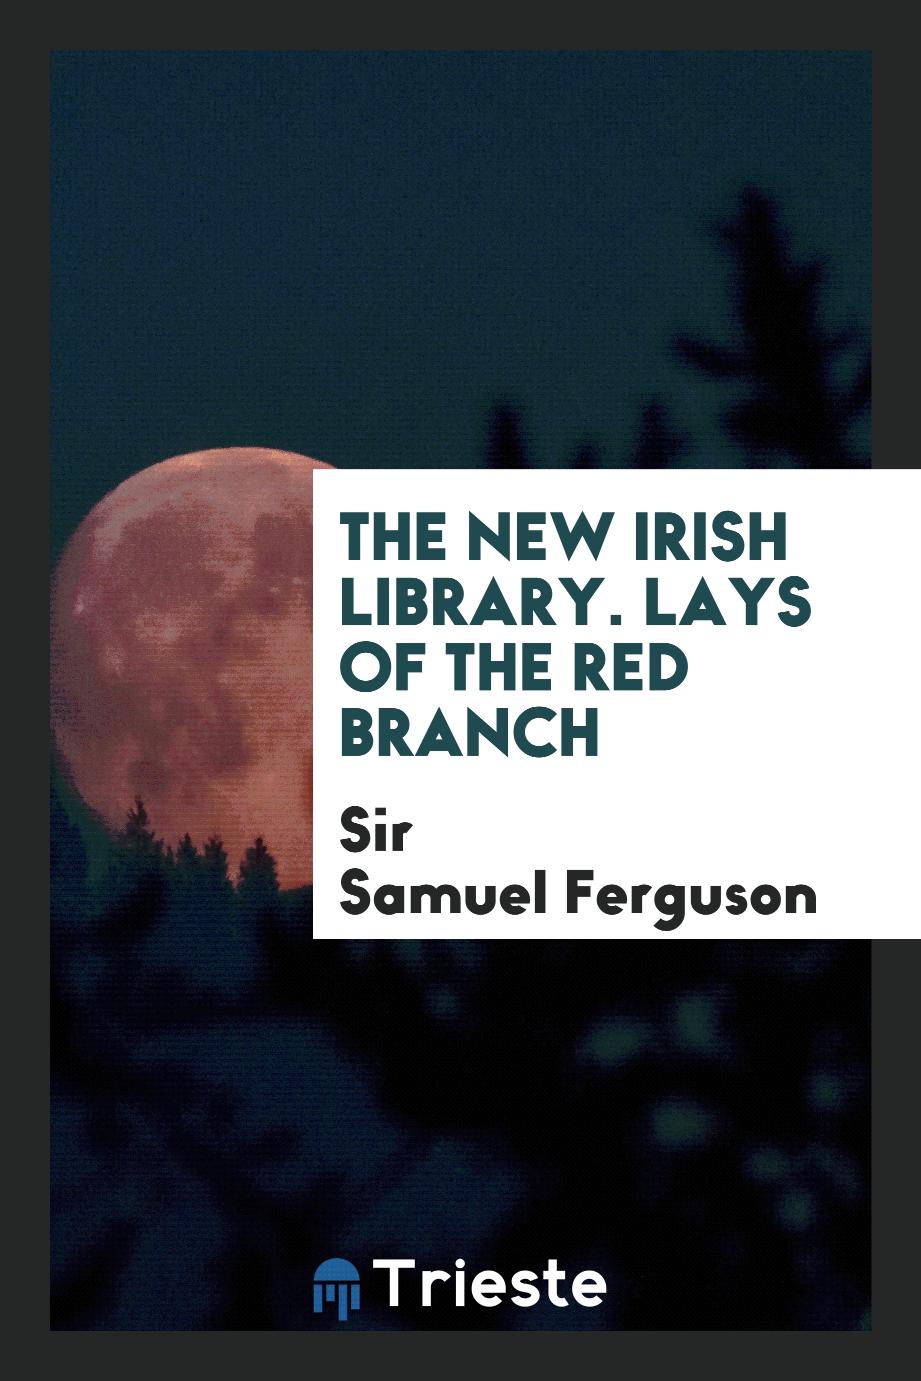 The new Irish Library. Lays of the red branch